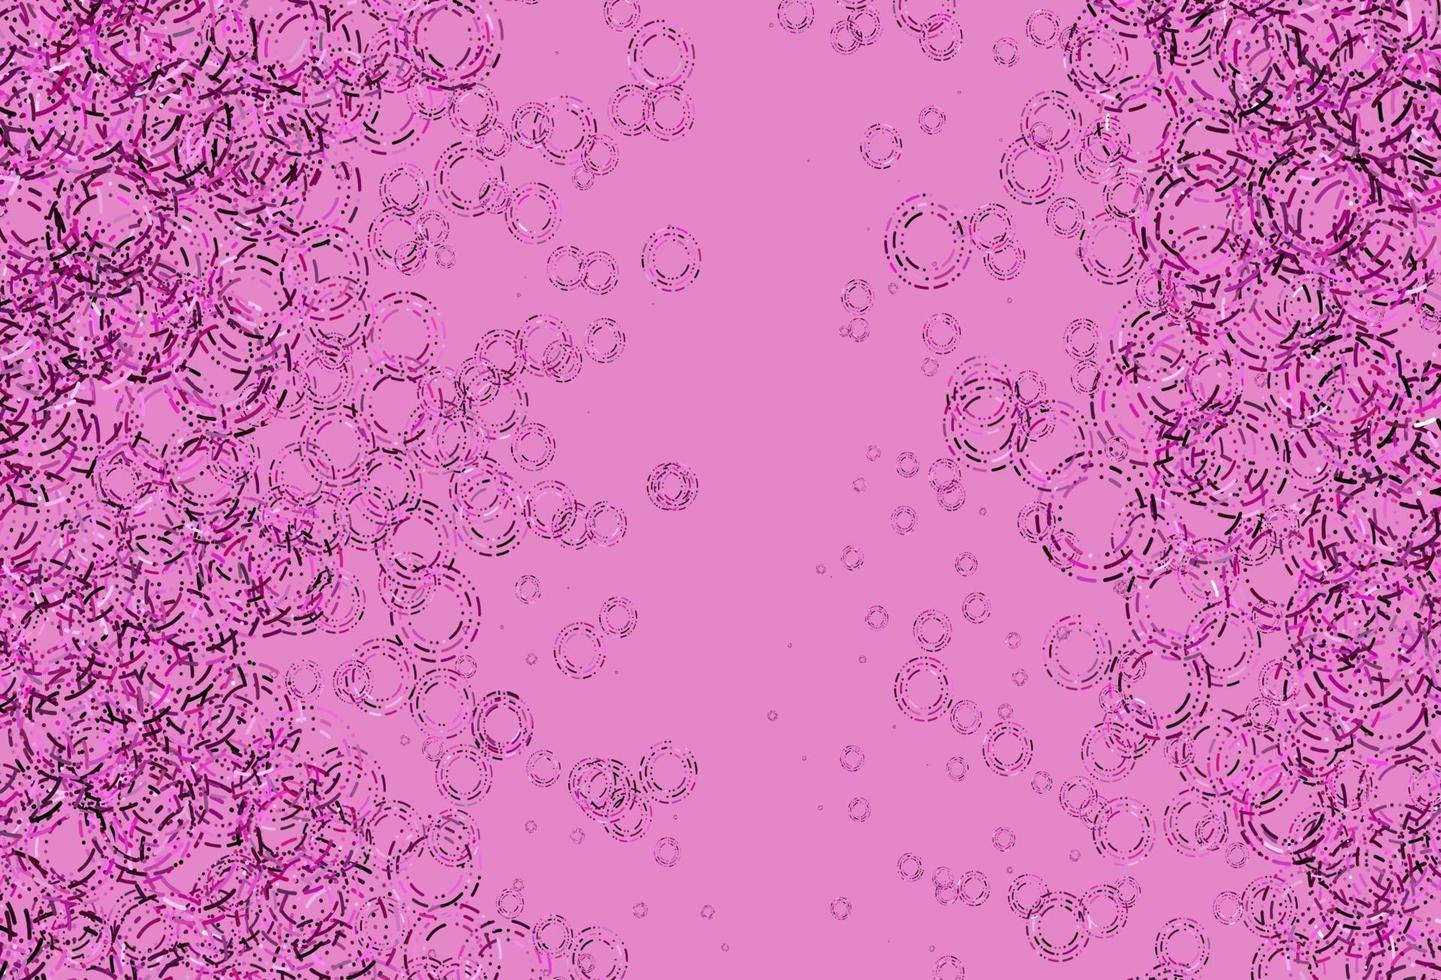 Light Pink vector background with bubbles.